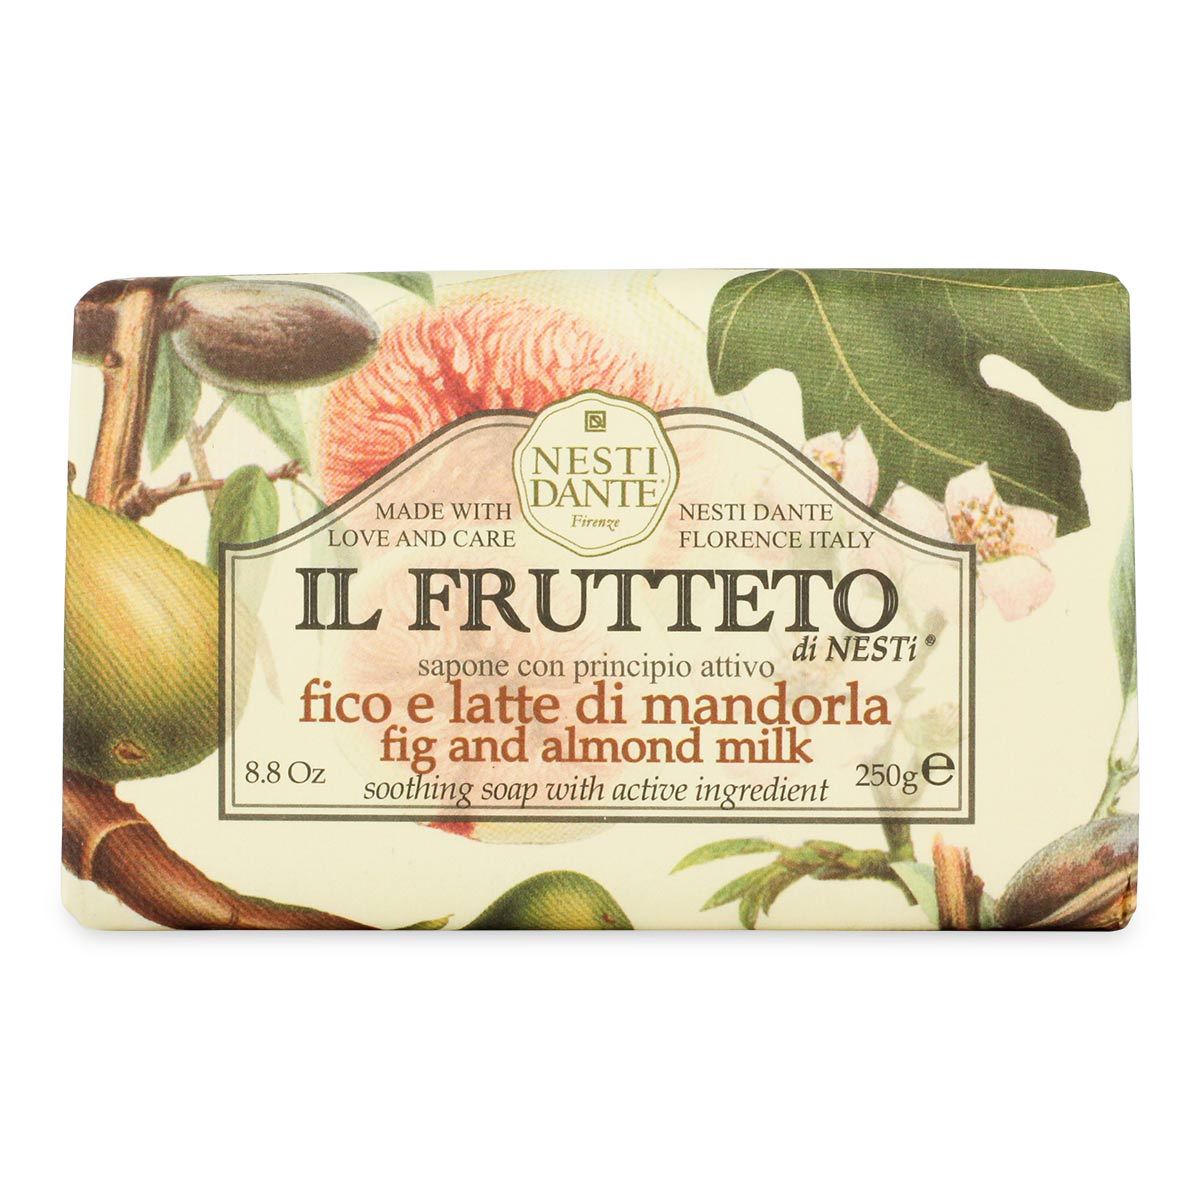 Primary image of Fig and Almond Milk Soap